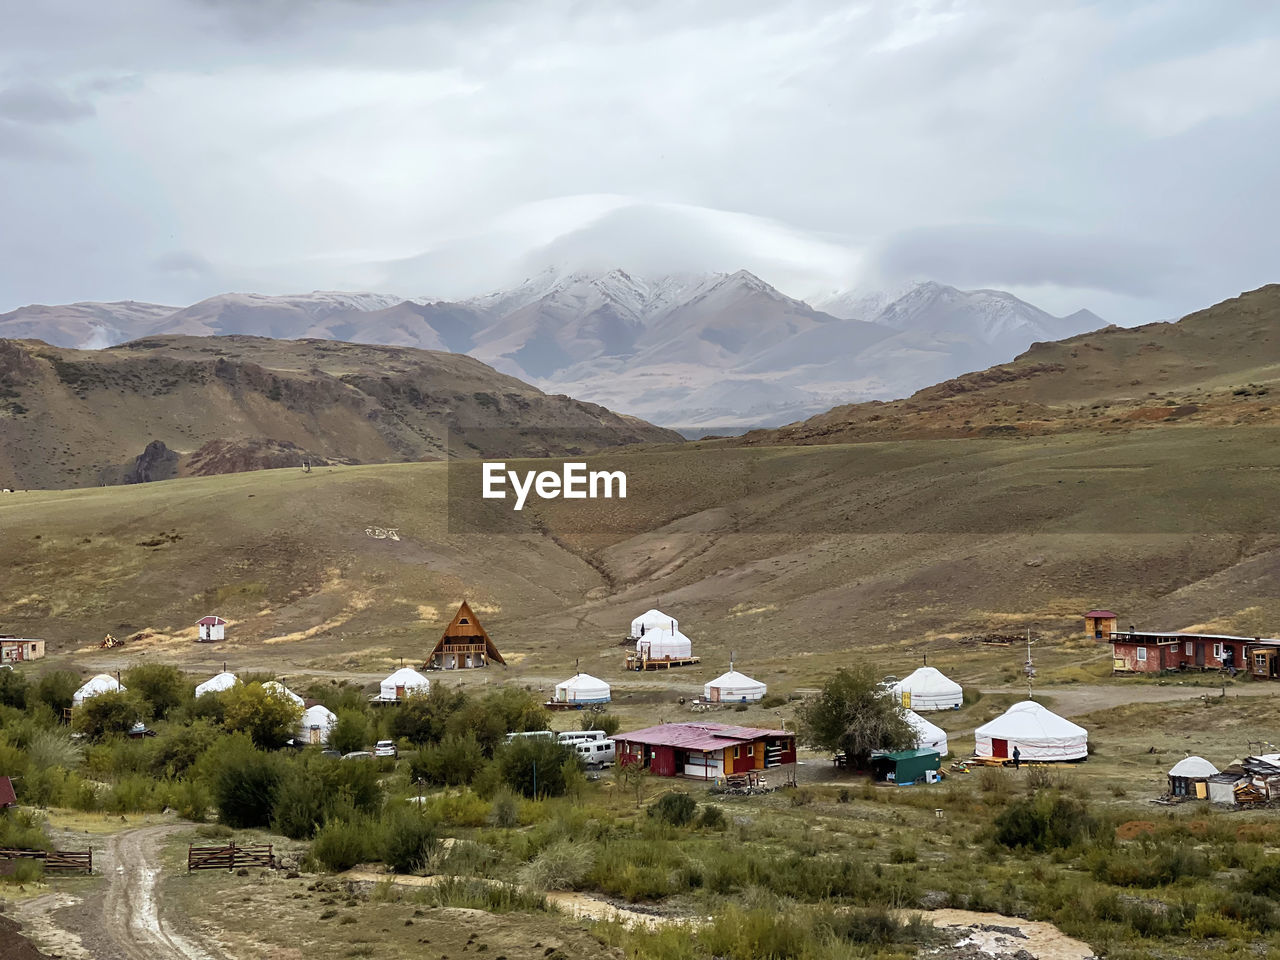 Yurt village against the snow-capped peaks in the southern part of altai, russia